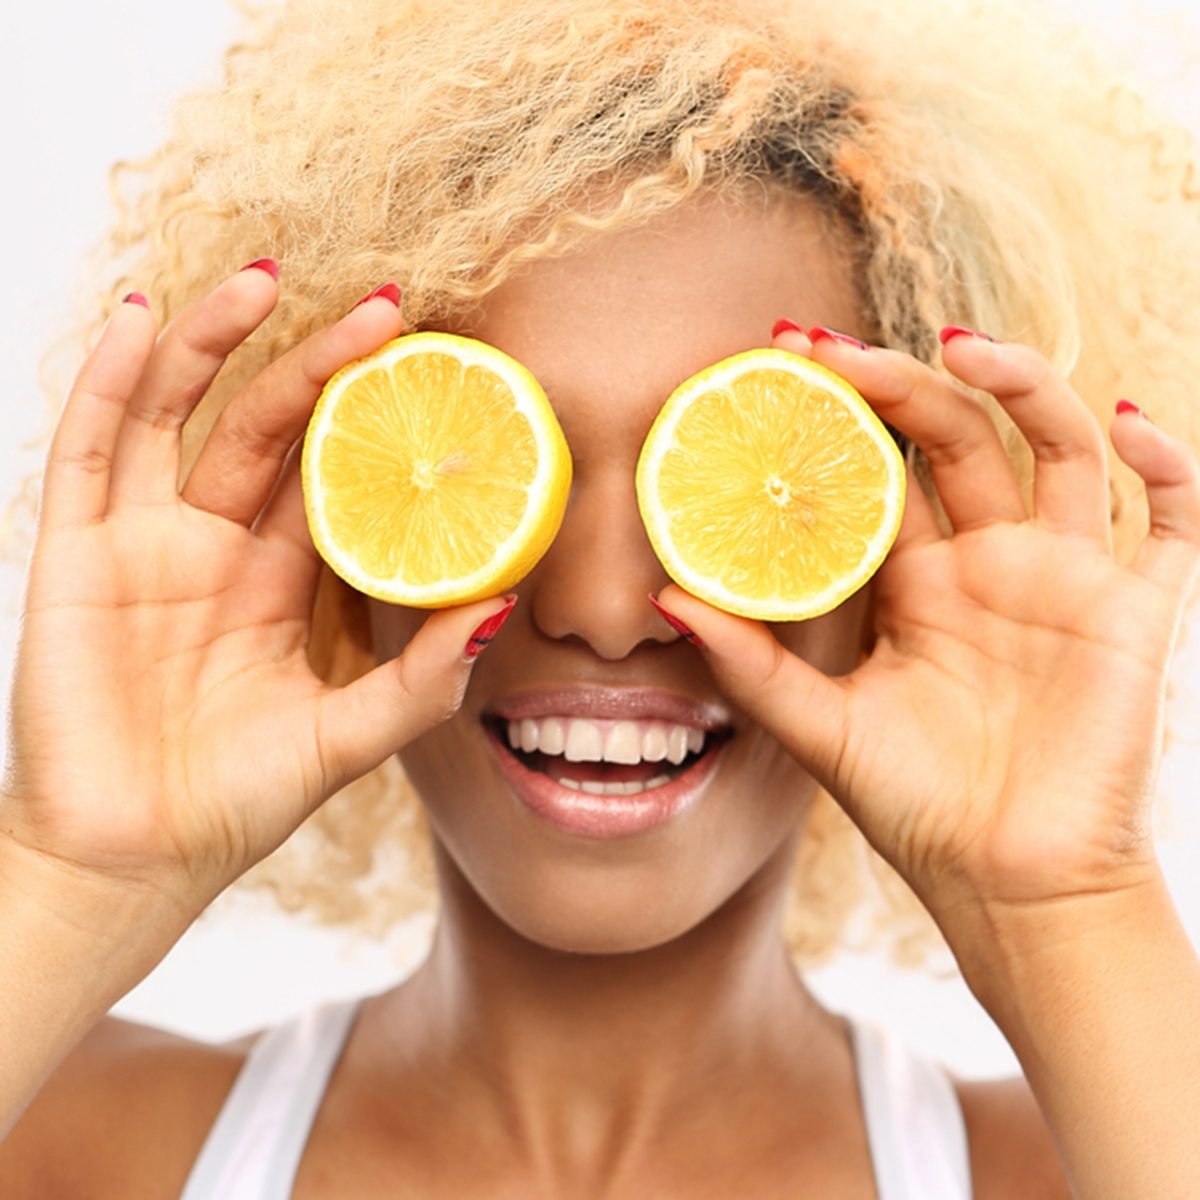 kontanter peddling uld 9 Health and Beauty Benefits of Lemon You Need to Know | Taste of Home